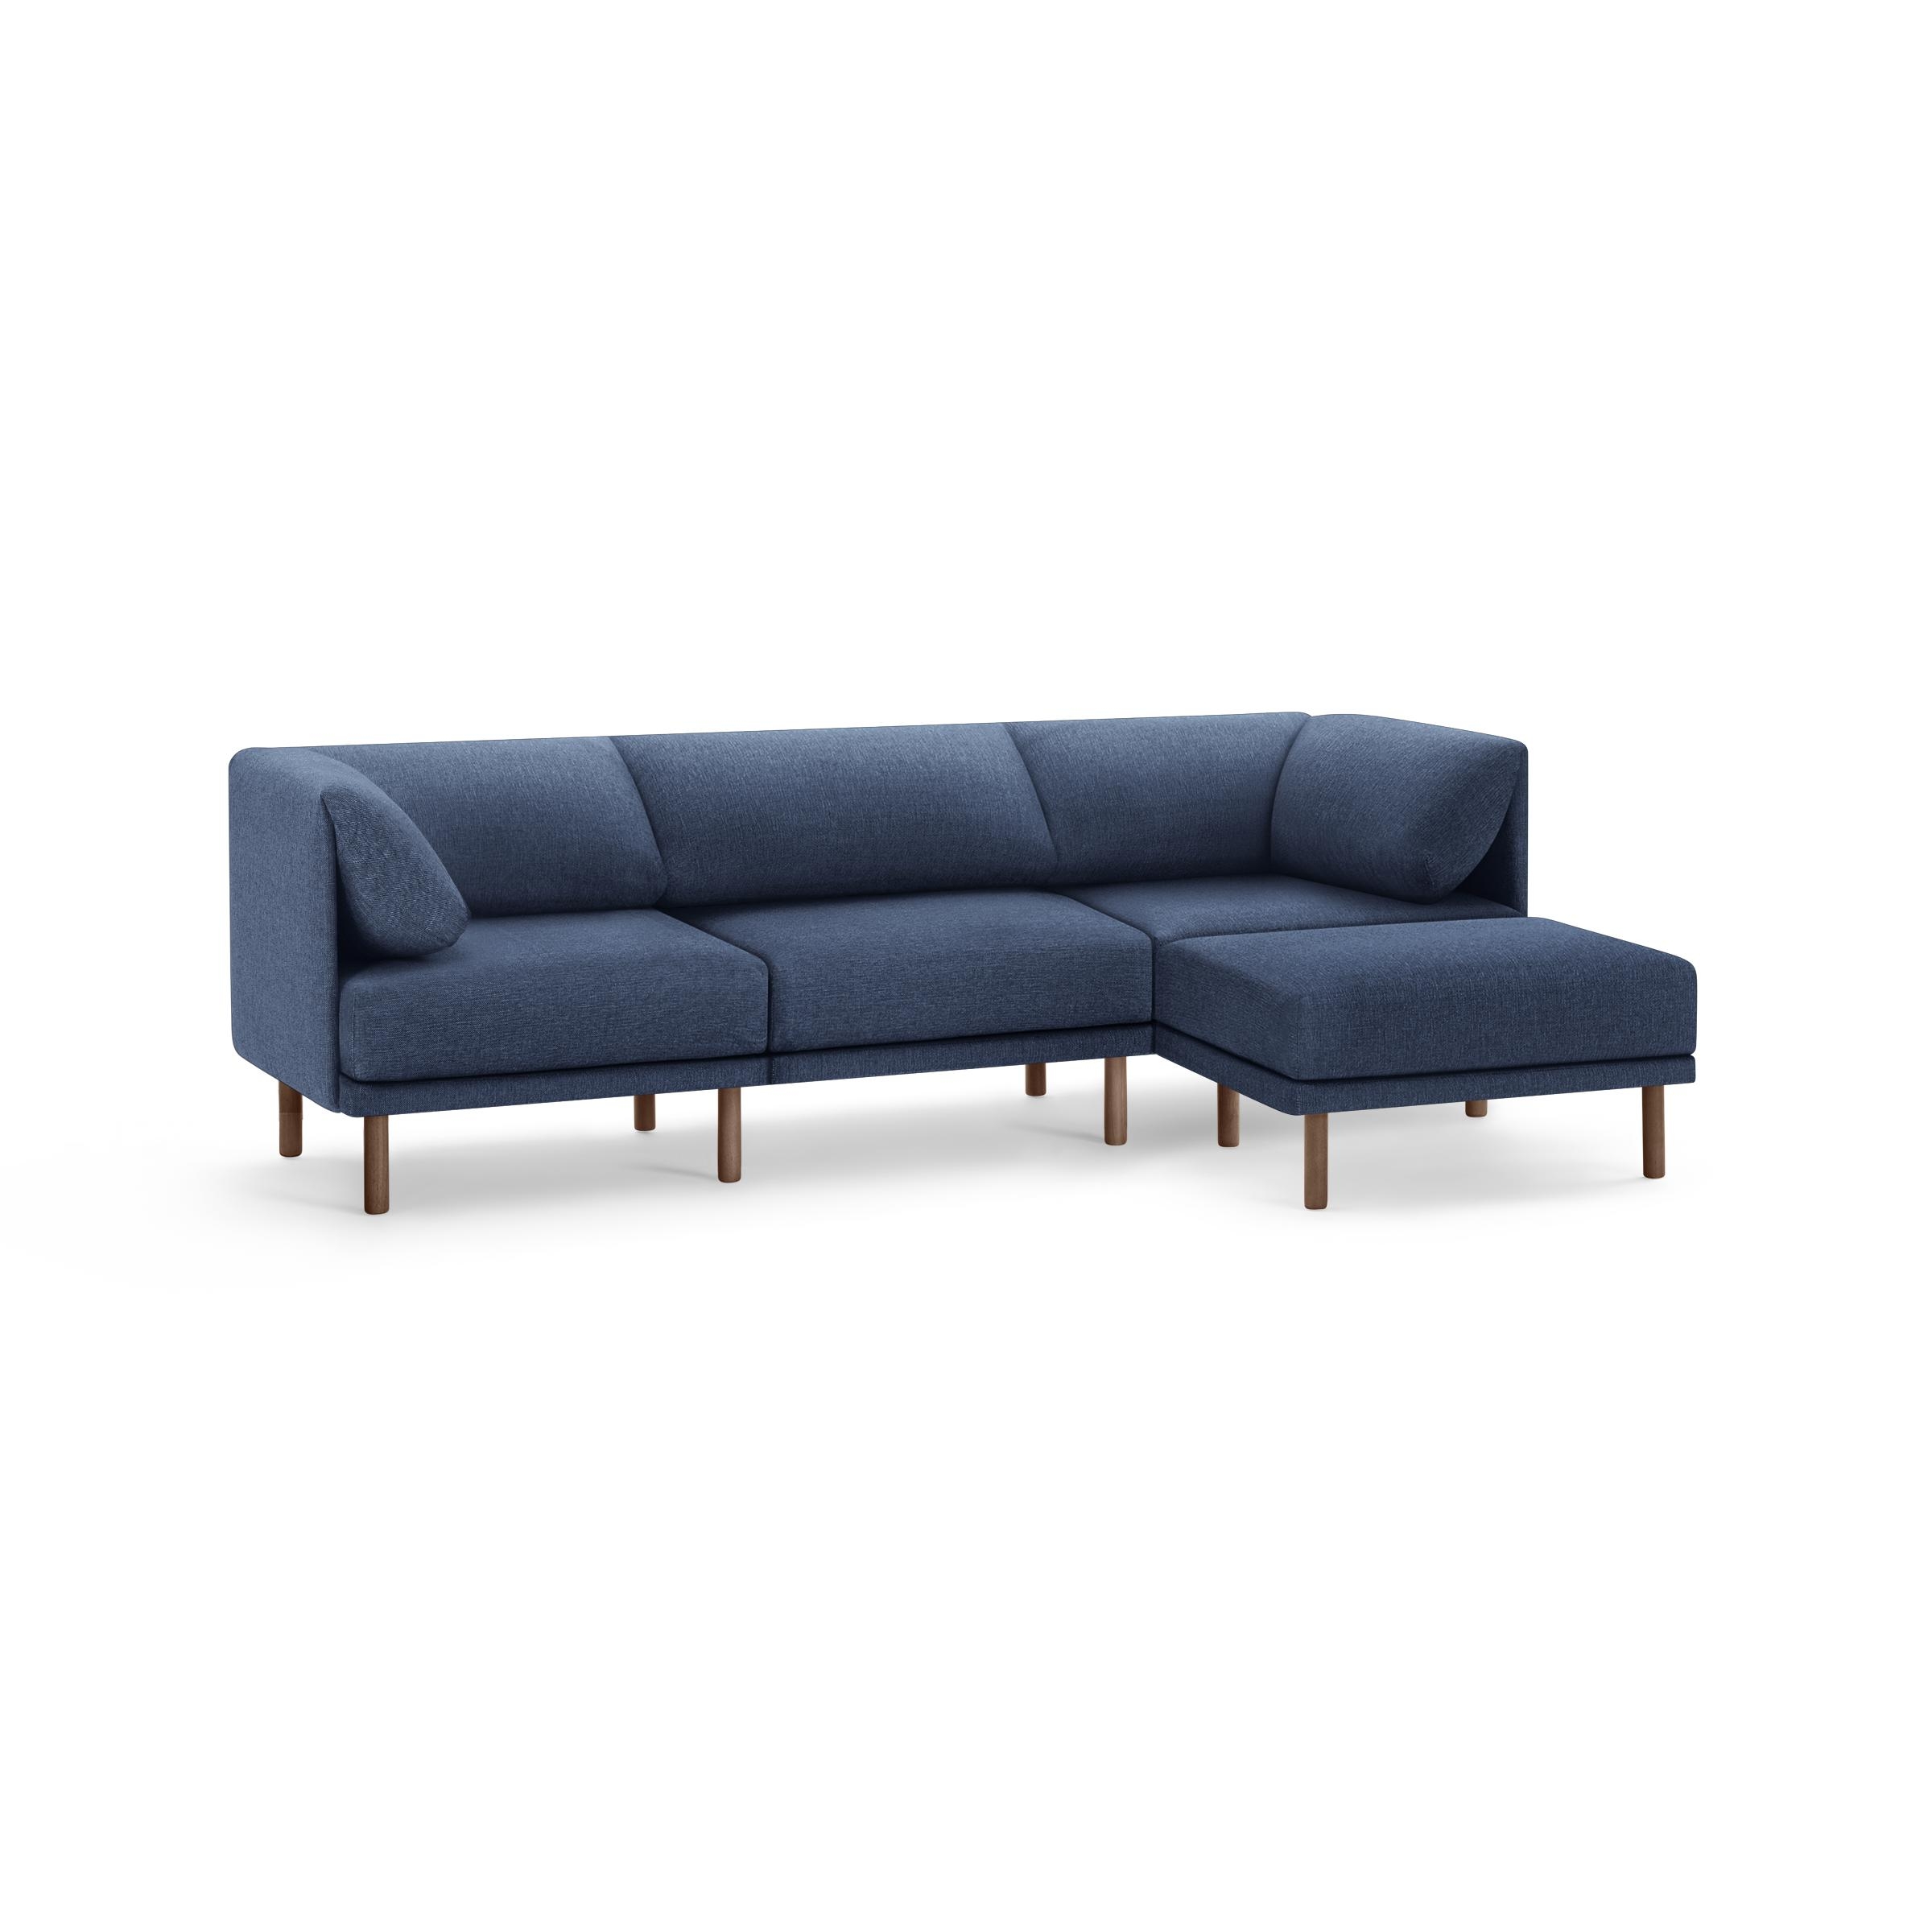 The Range 4-Piece Sectional Lounger in Navy Blue, Walnut Legs - Image 0